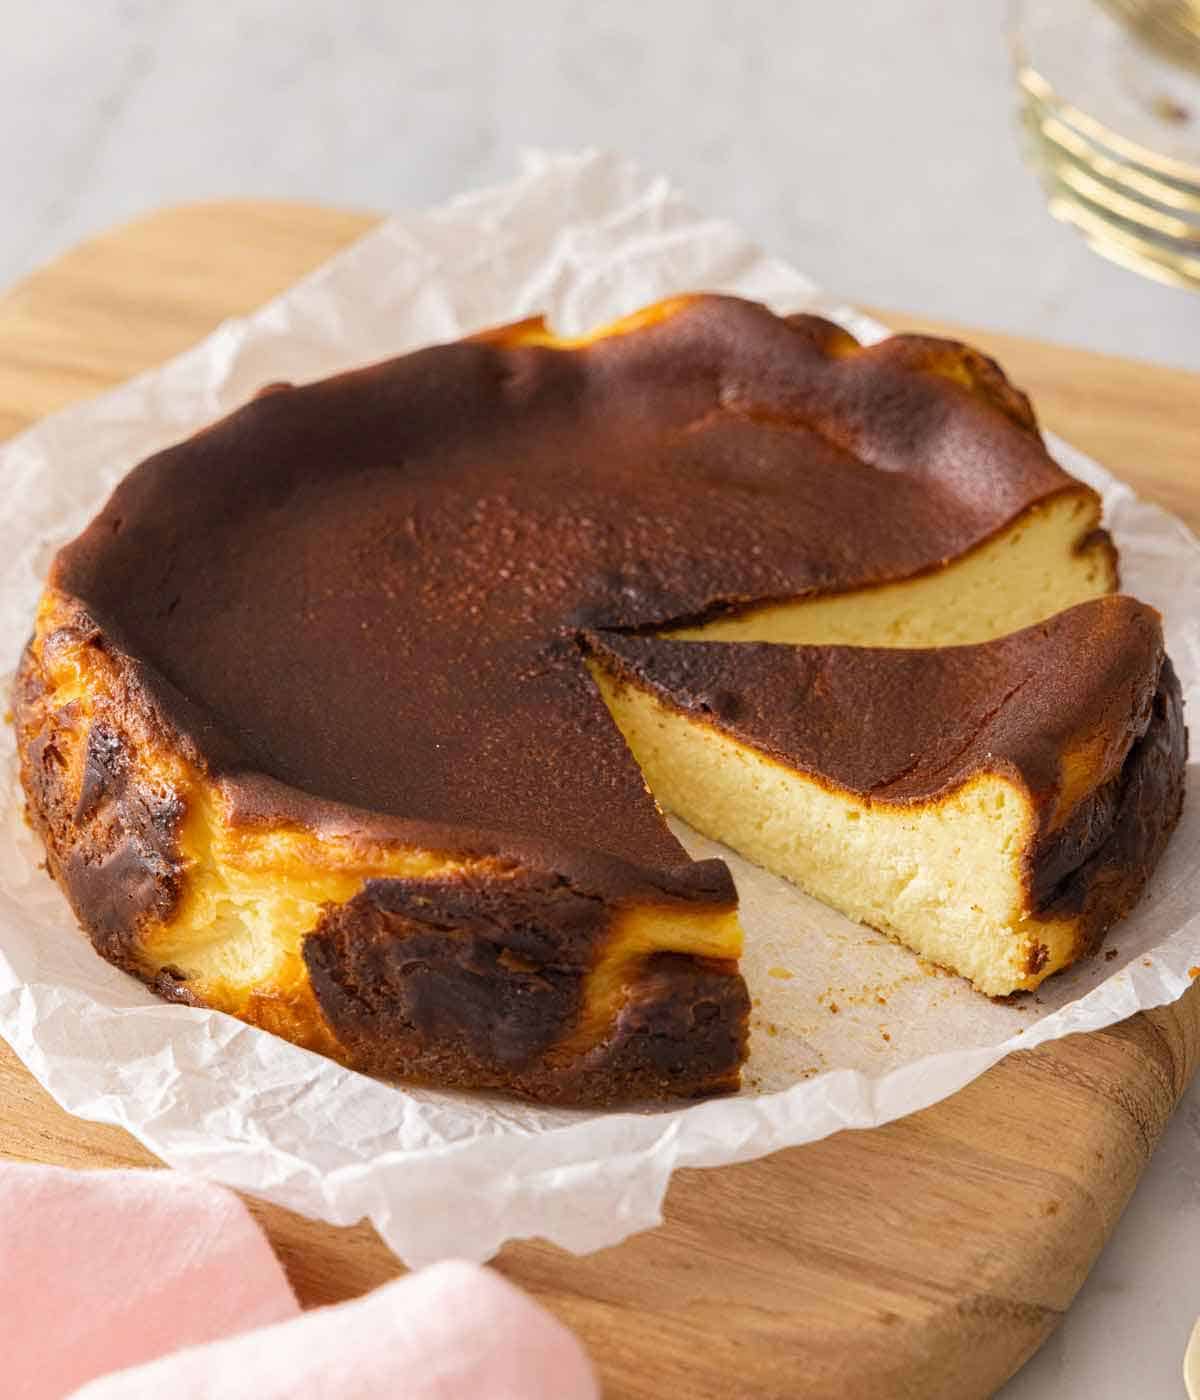 A basque cheesecake with a slice cut out and another cut but not removed.